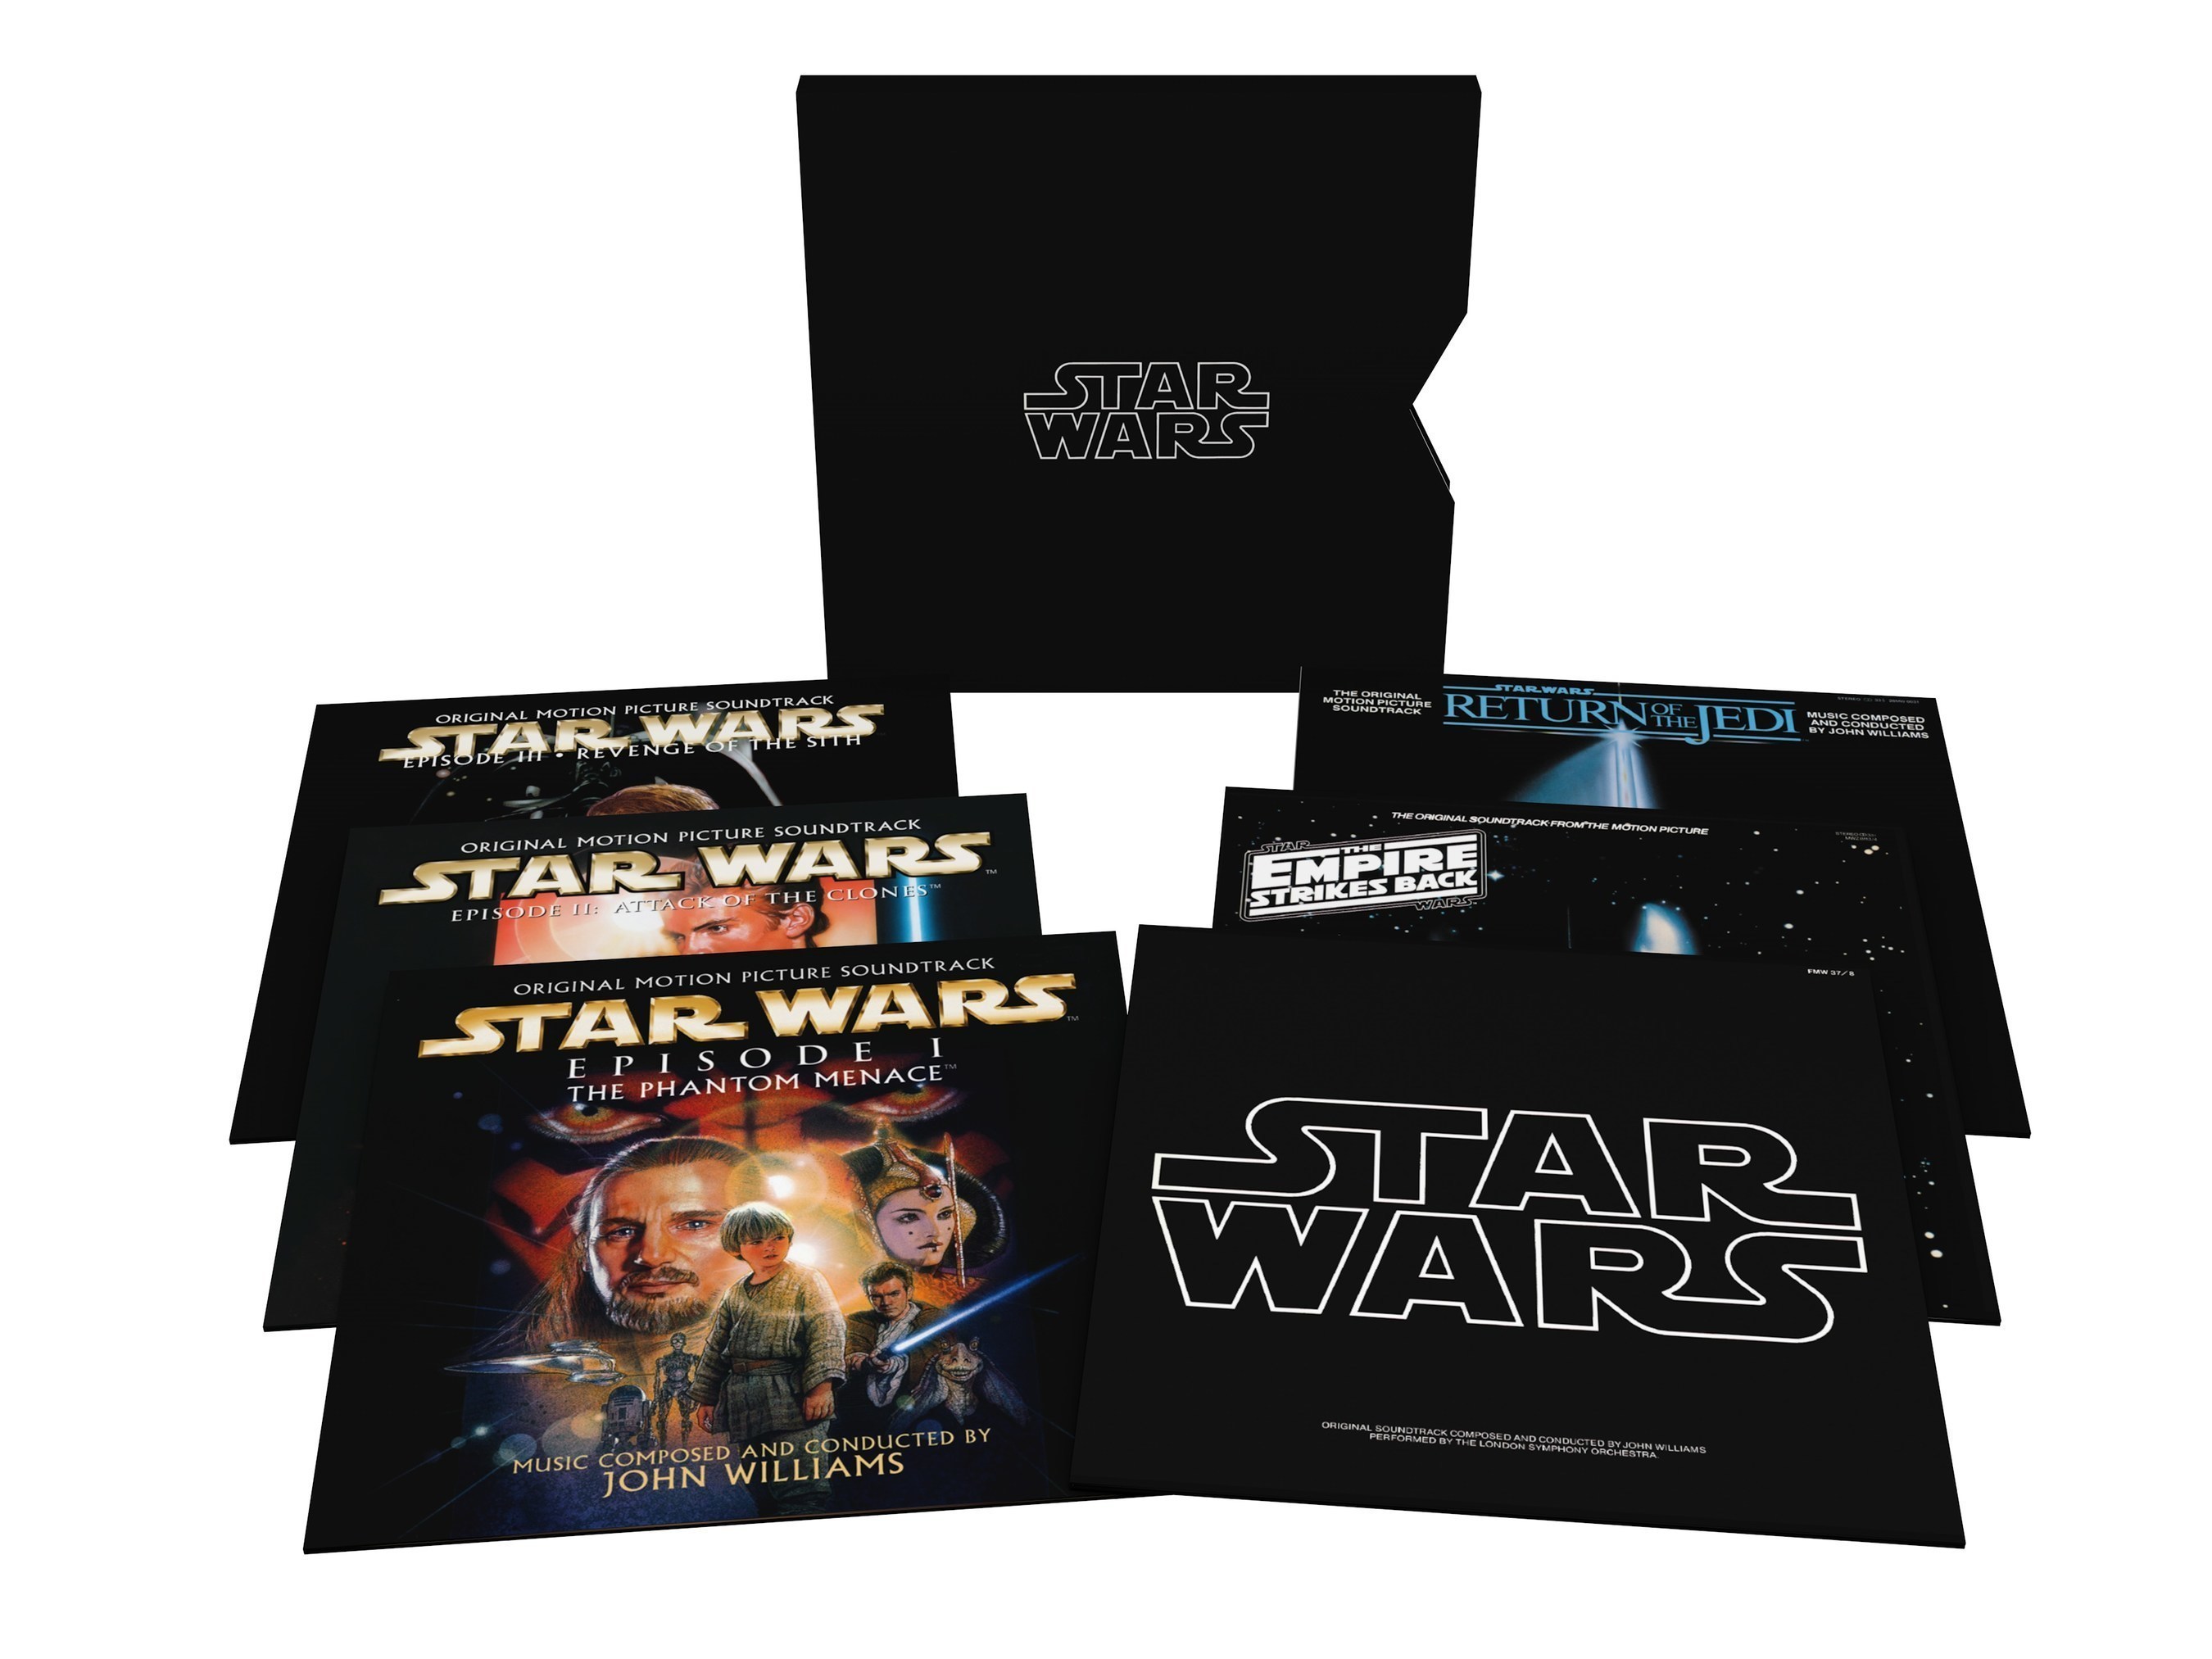 Star Wars: The Ultimate Vinyl Collection (11 LPs) - available now